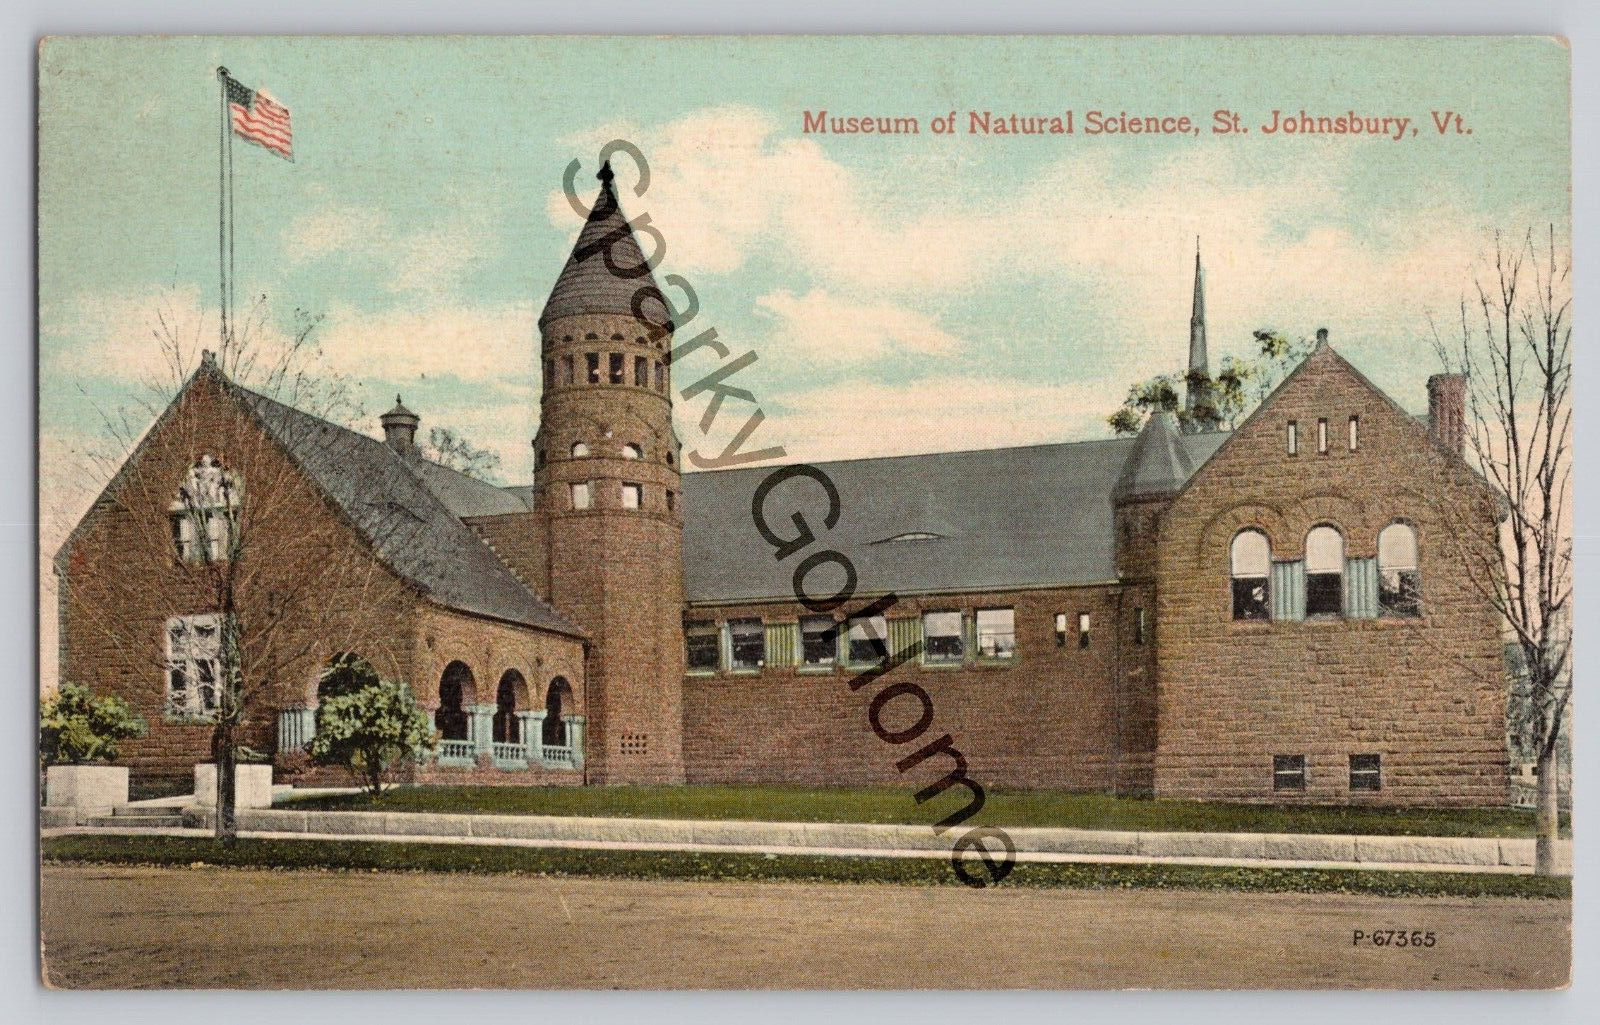 MUSEUM OF NATURAL SCIENCE, ST. JOHNSBURY VT VERMONT POSTCARD